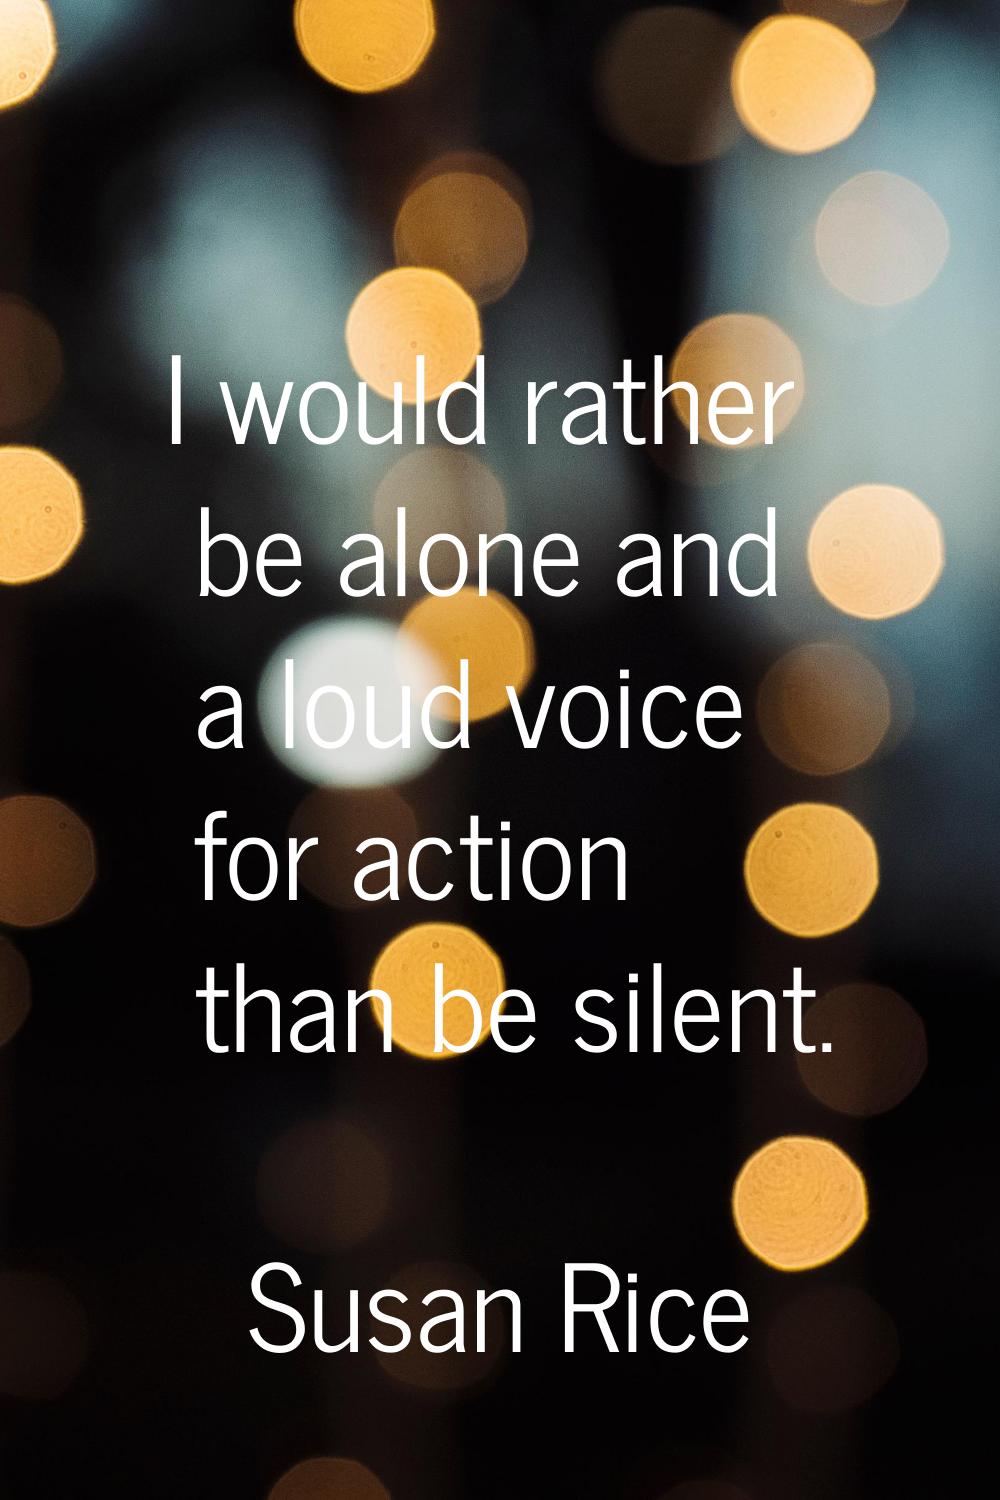 I would rather be alone and a loud voice for action than be silent.